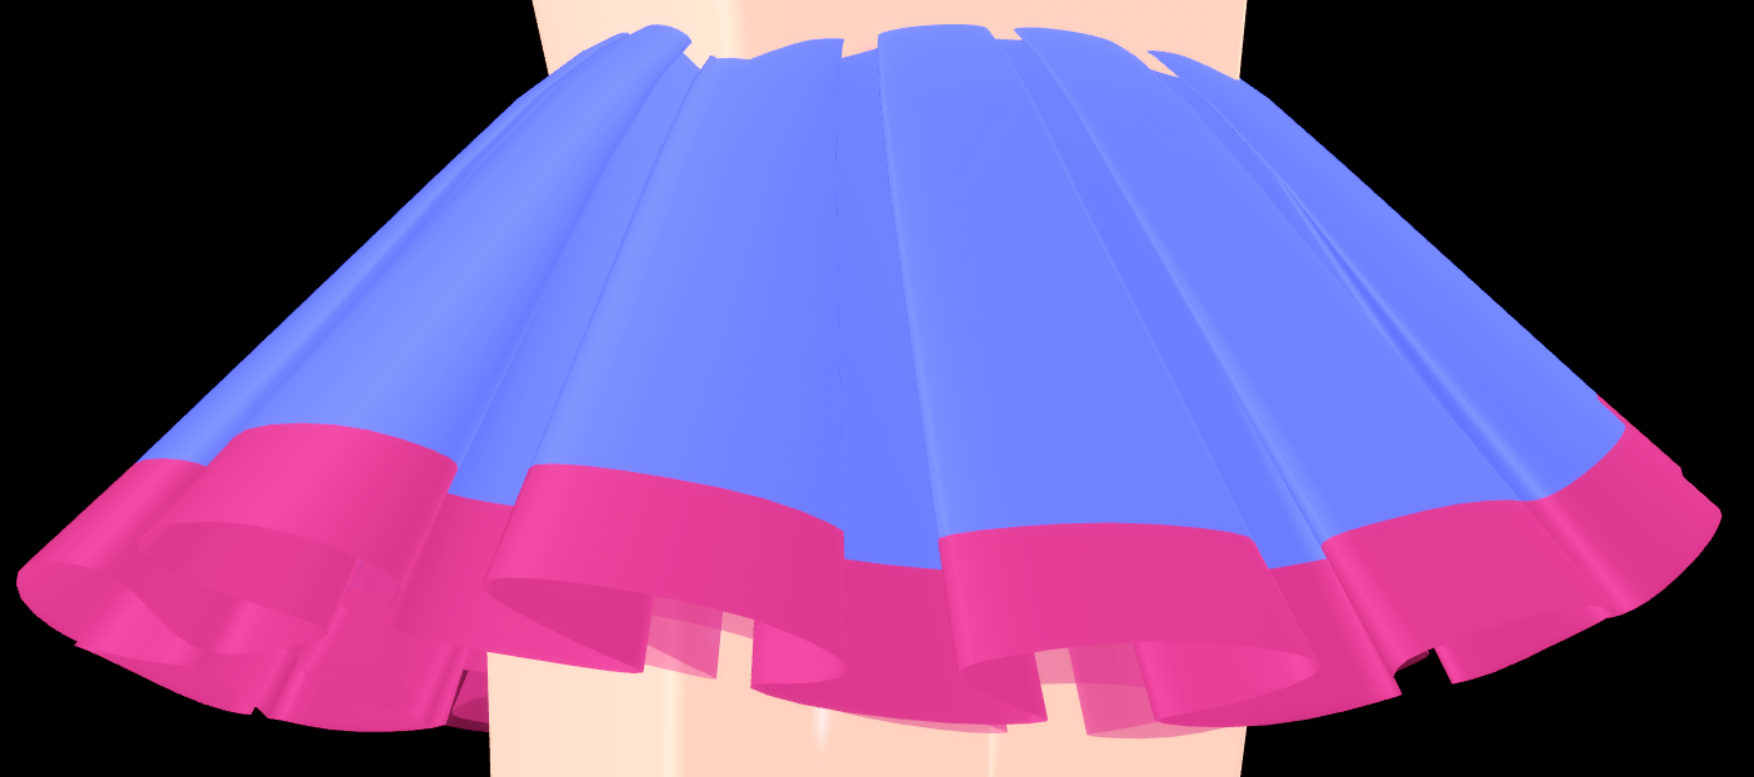 Royale High Pleated Skirt Outfits